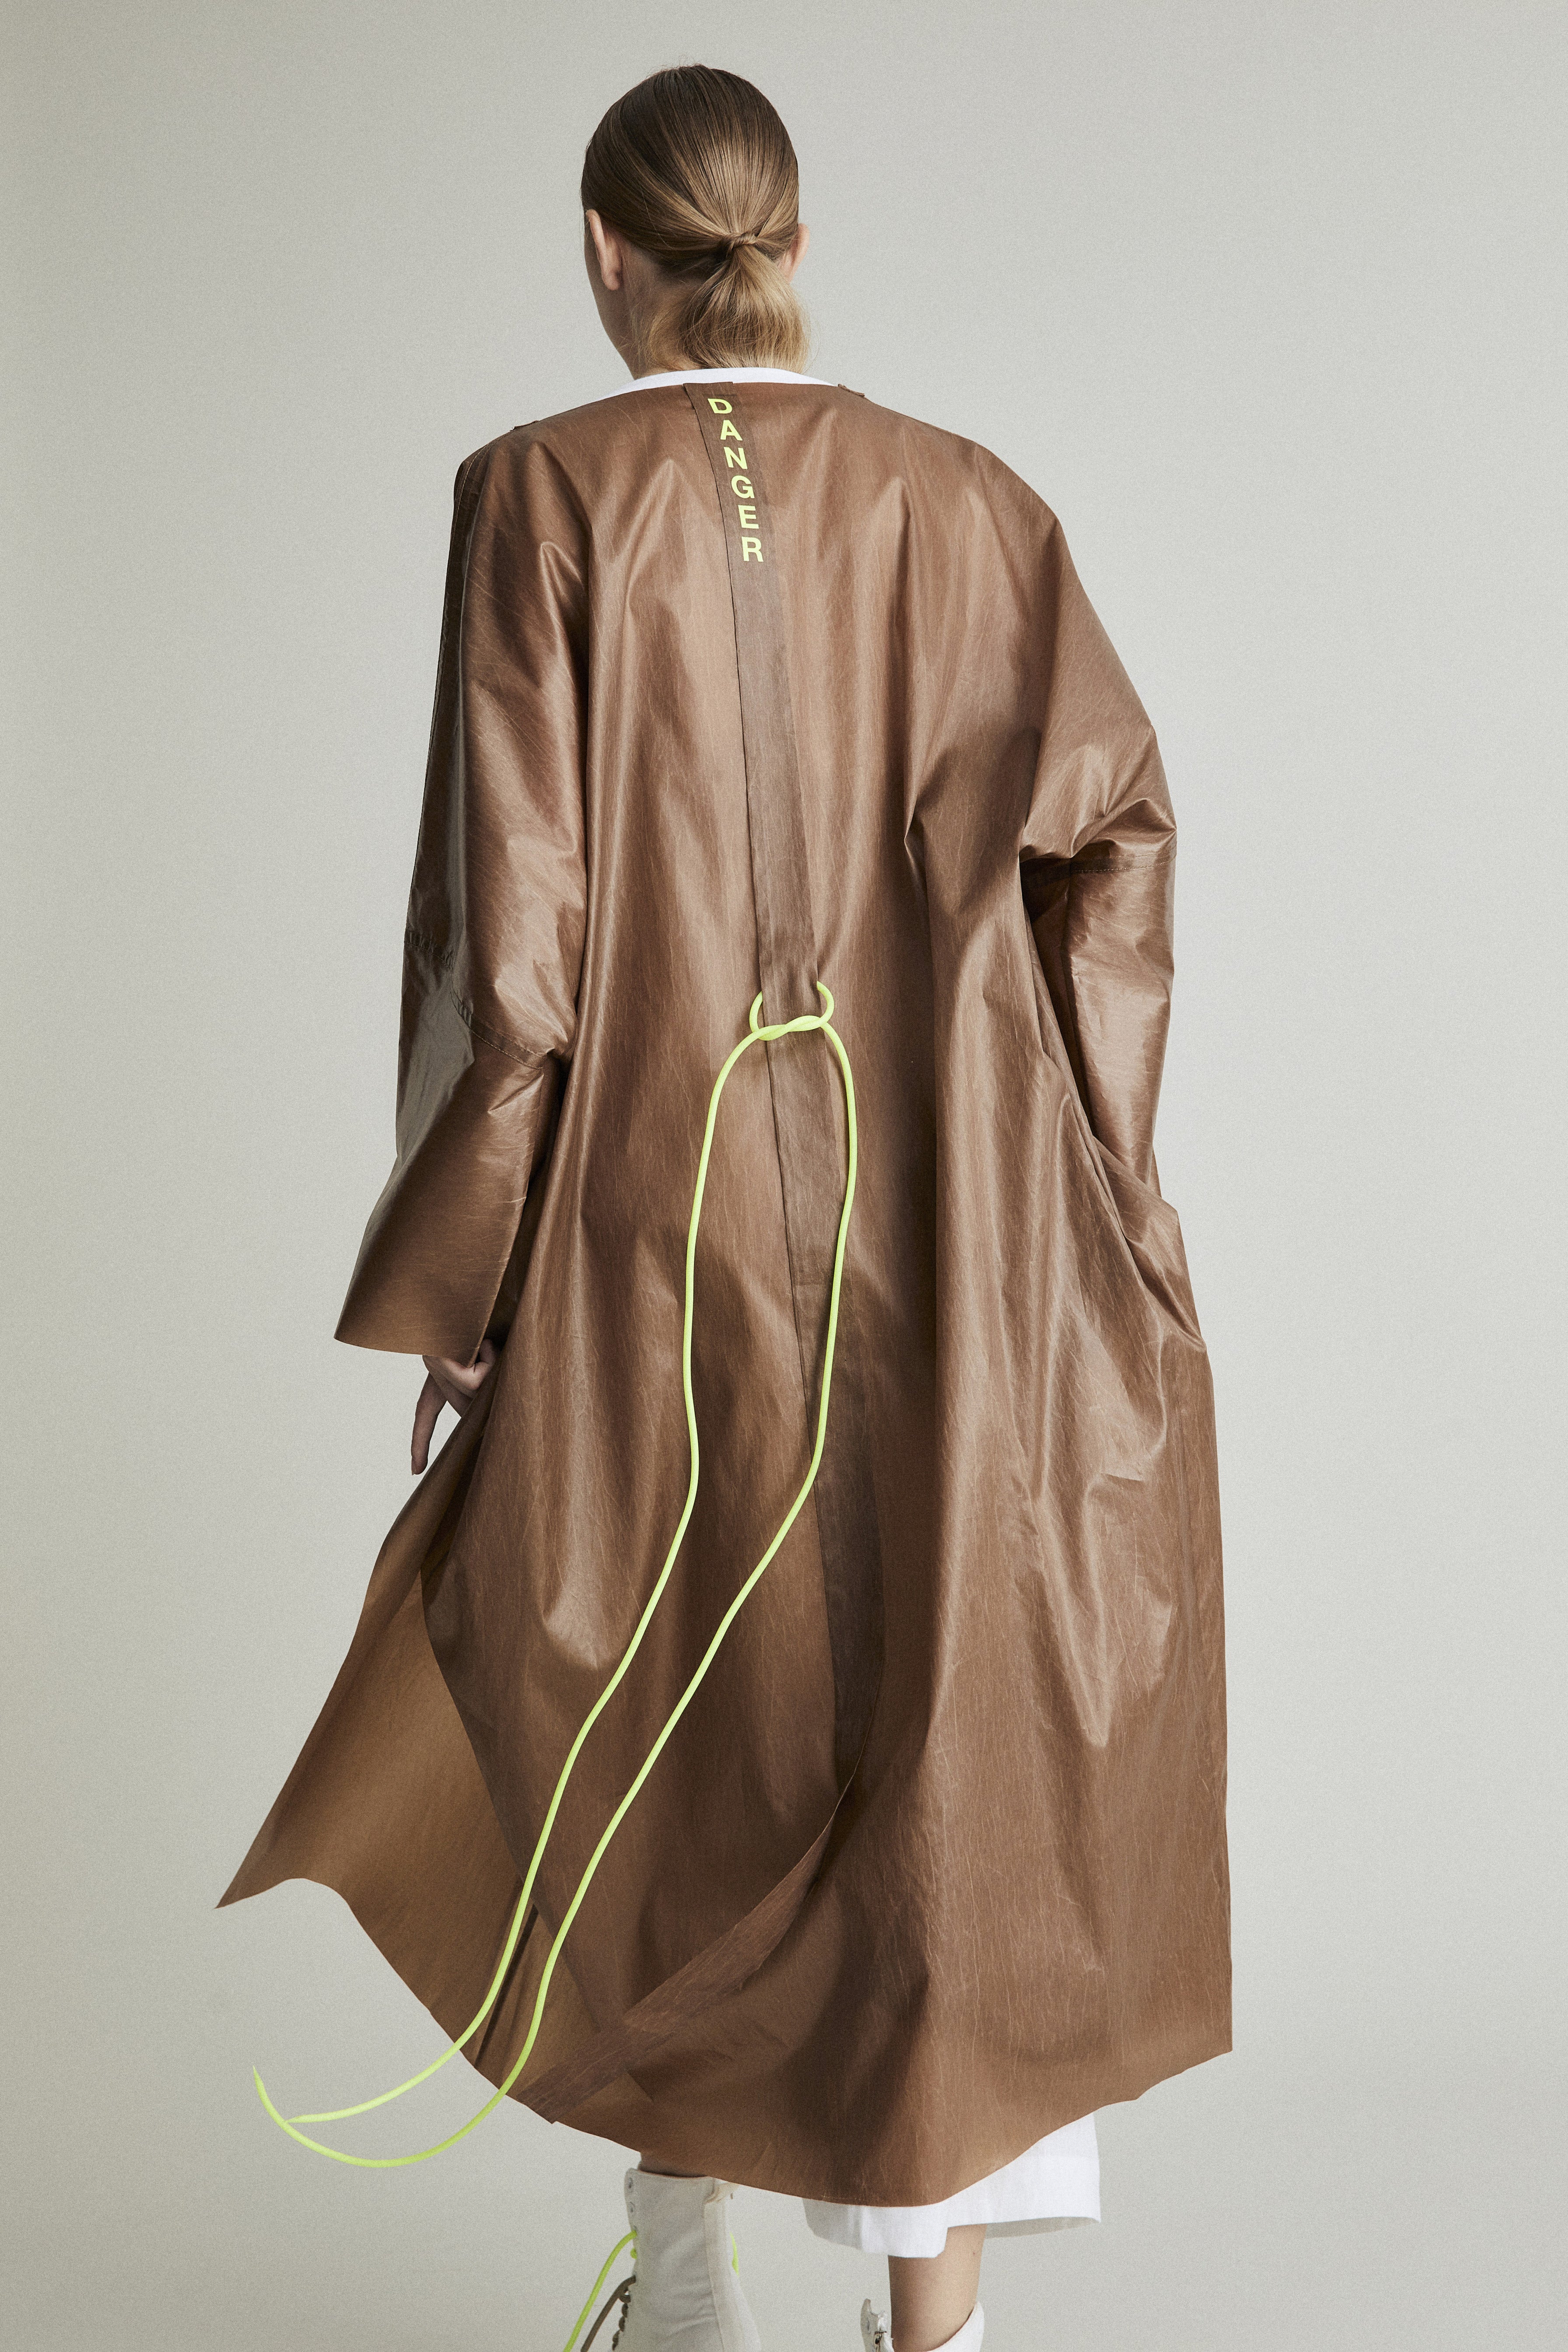 The back of a woman wearing alight raincoat bronze colored with bright green details. 